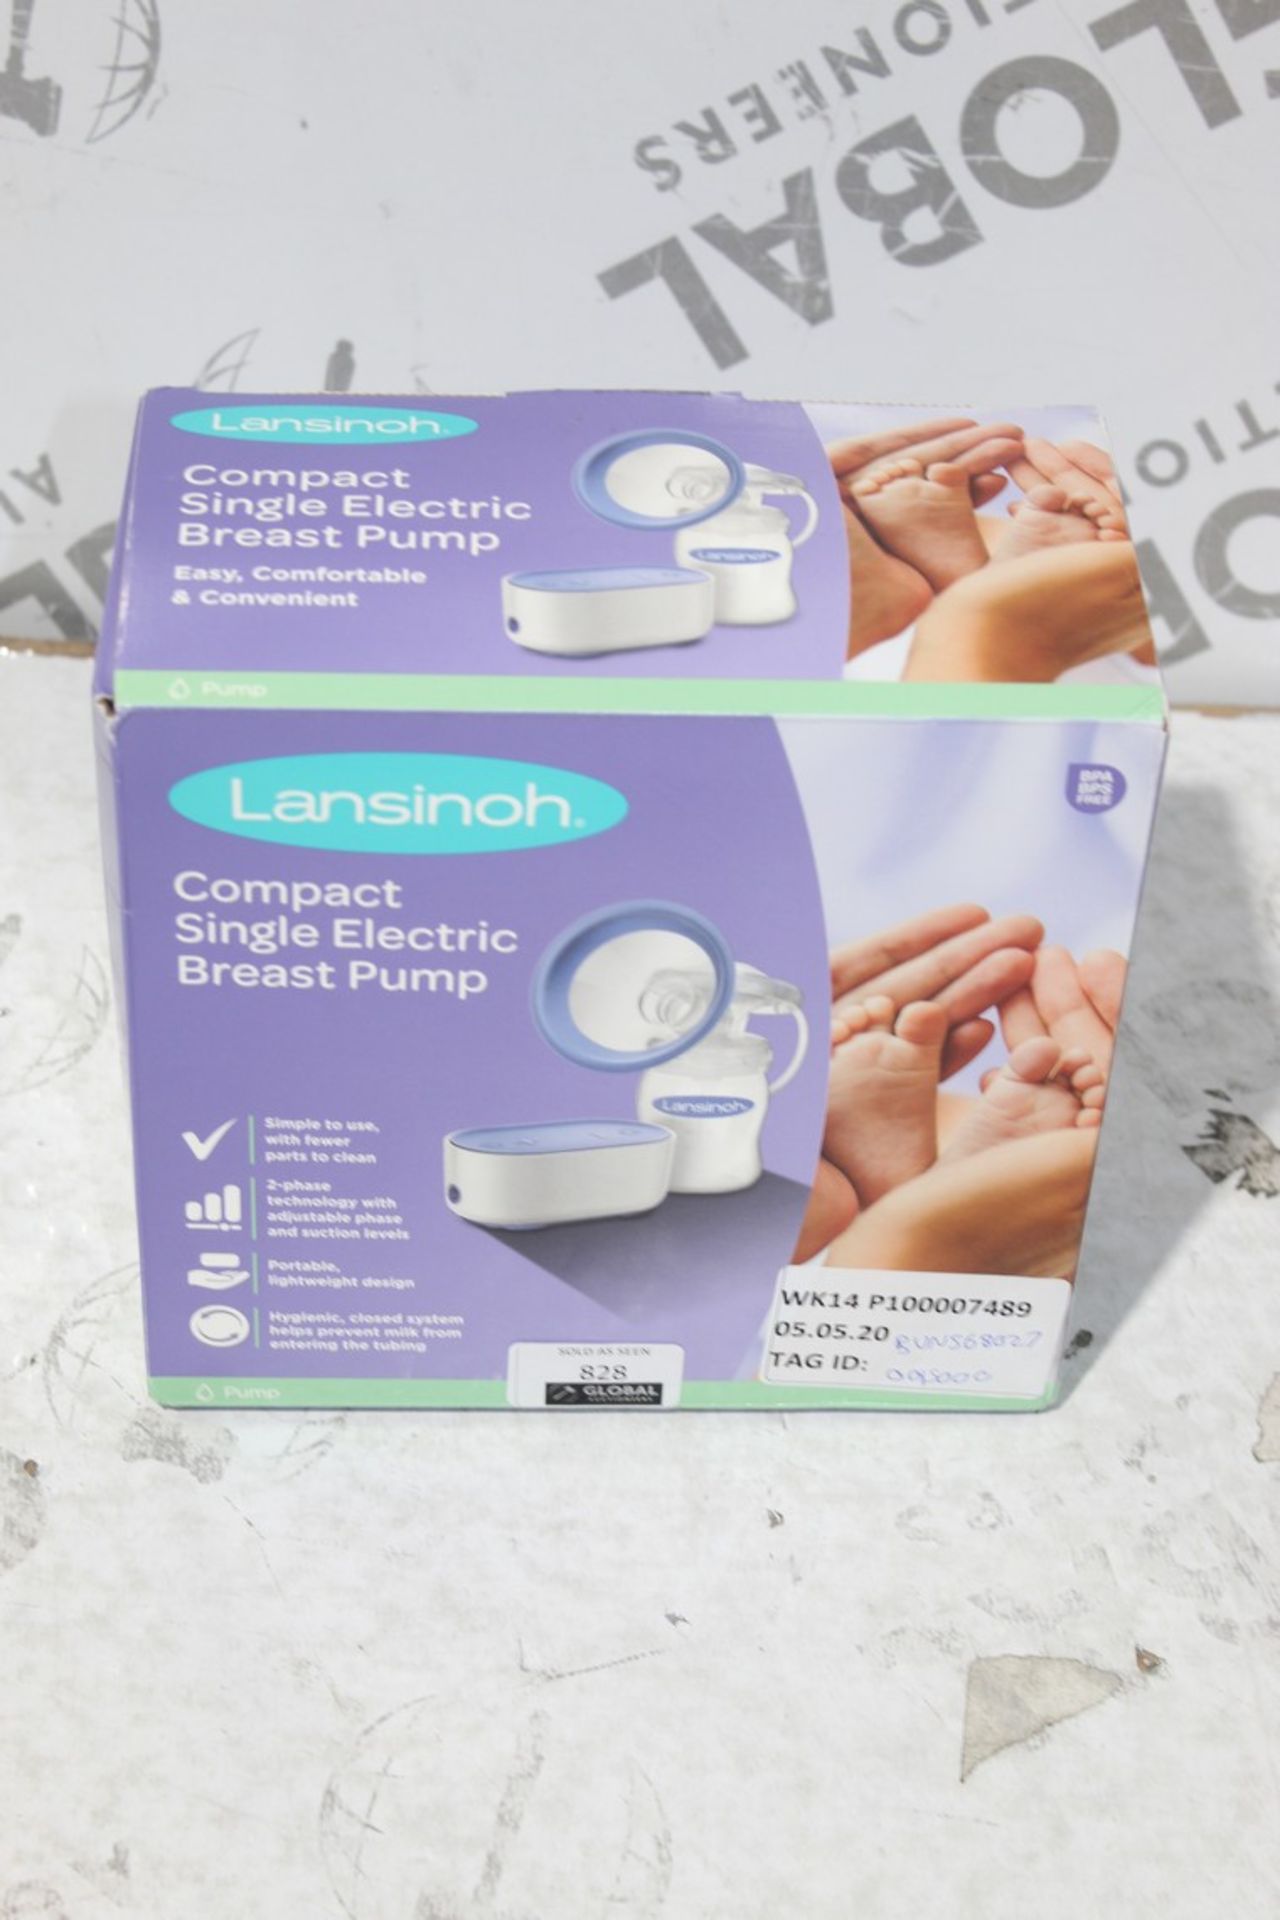 Lansinoh Compact Single Electric Breast Pump RRP £95 (BUN568027) (Pictures Are For Illustration